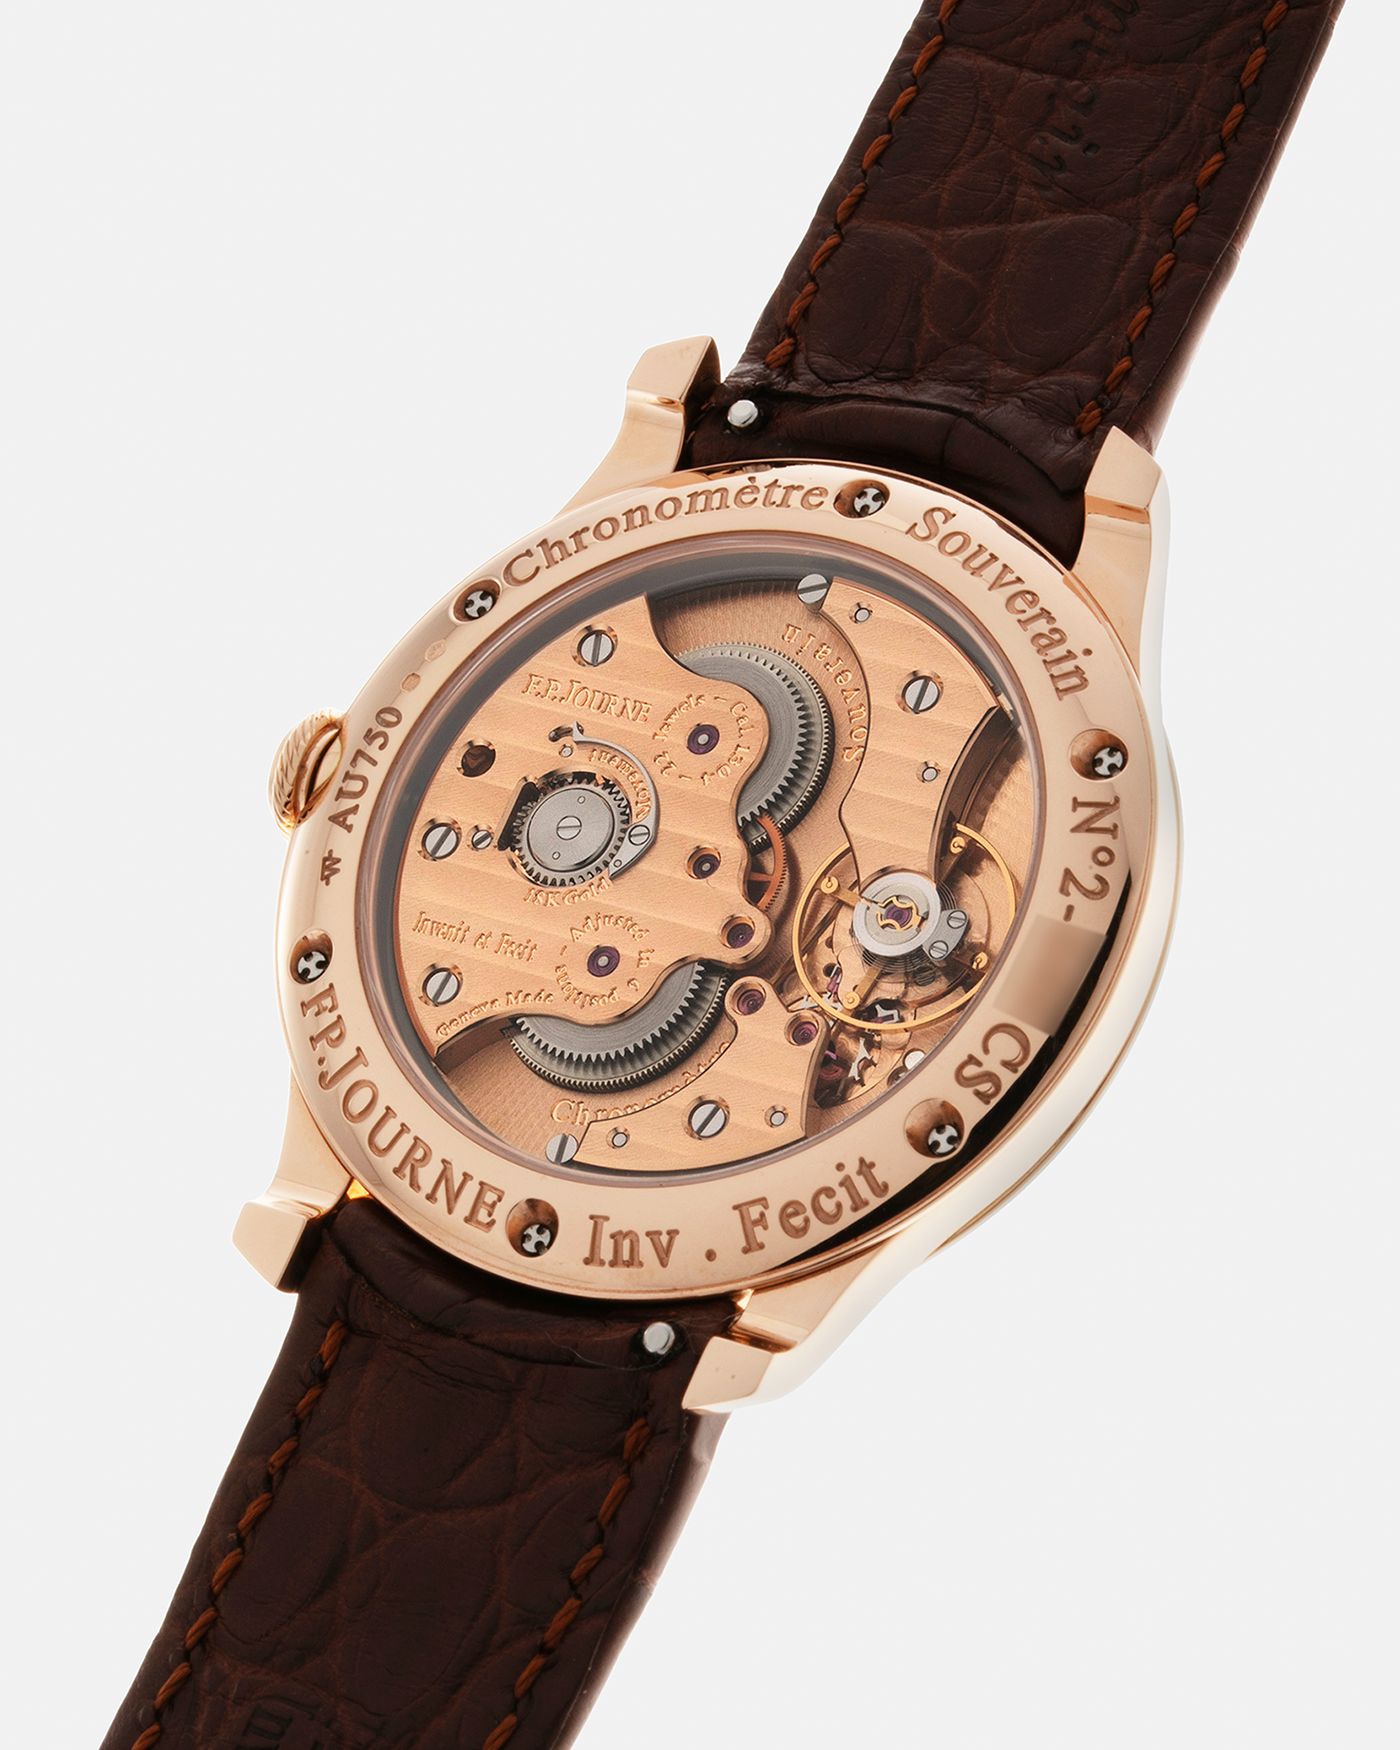 Brand: F.P. Journe Year: 2021 Model: Chronomètre Souverain Material: 18-carat Rose Gold Movement: F.P Journe Cal. 1304, Manual-Winding Case Diameter: 40mm Lug Width: 20mm Strap: F.P. Journe Brown Alligator Leather Strap and Signed 18-carat Rose Gold Tang Buckle